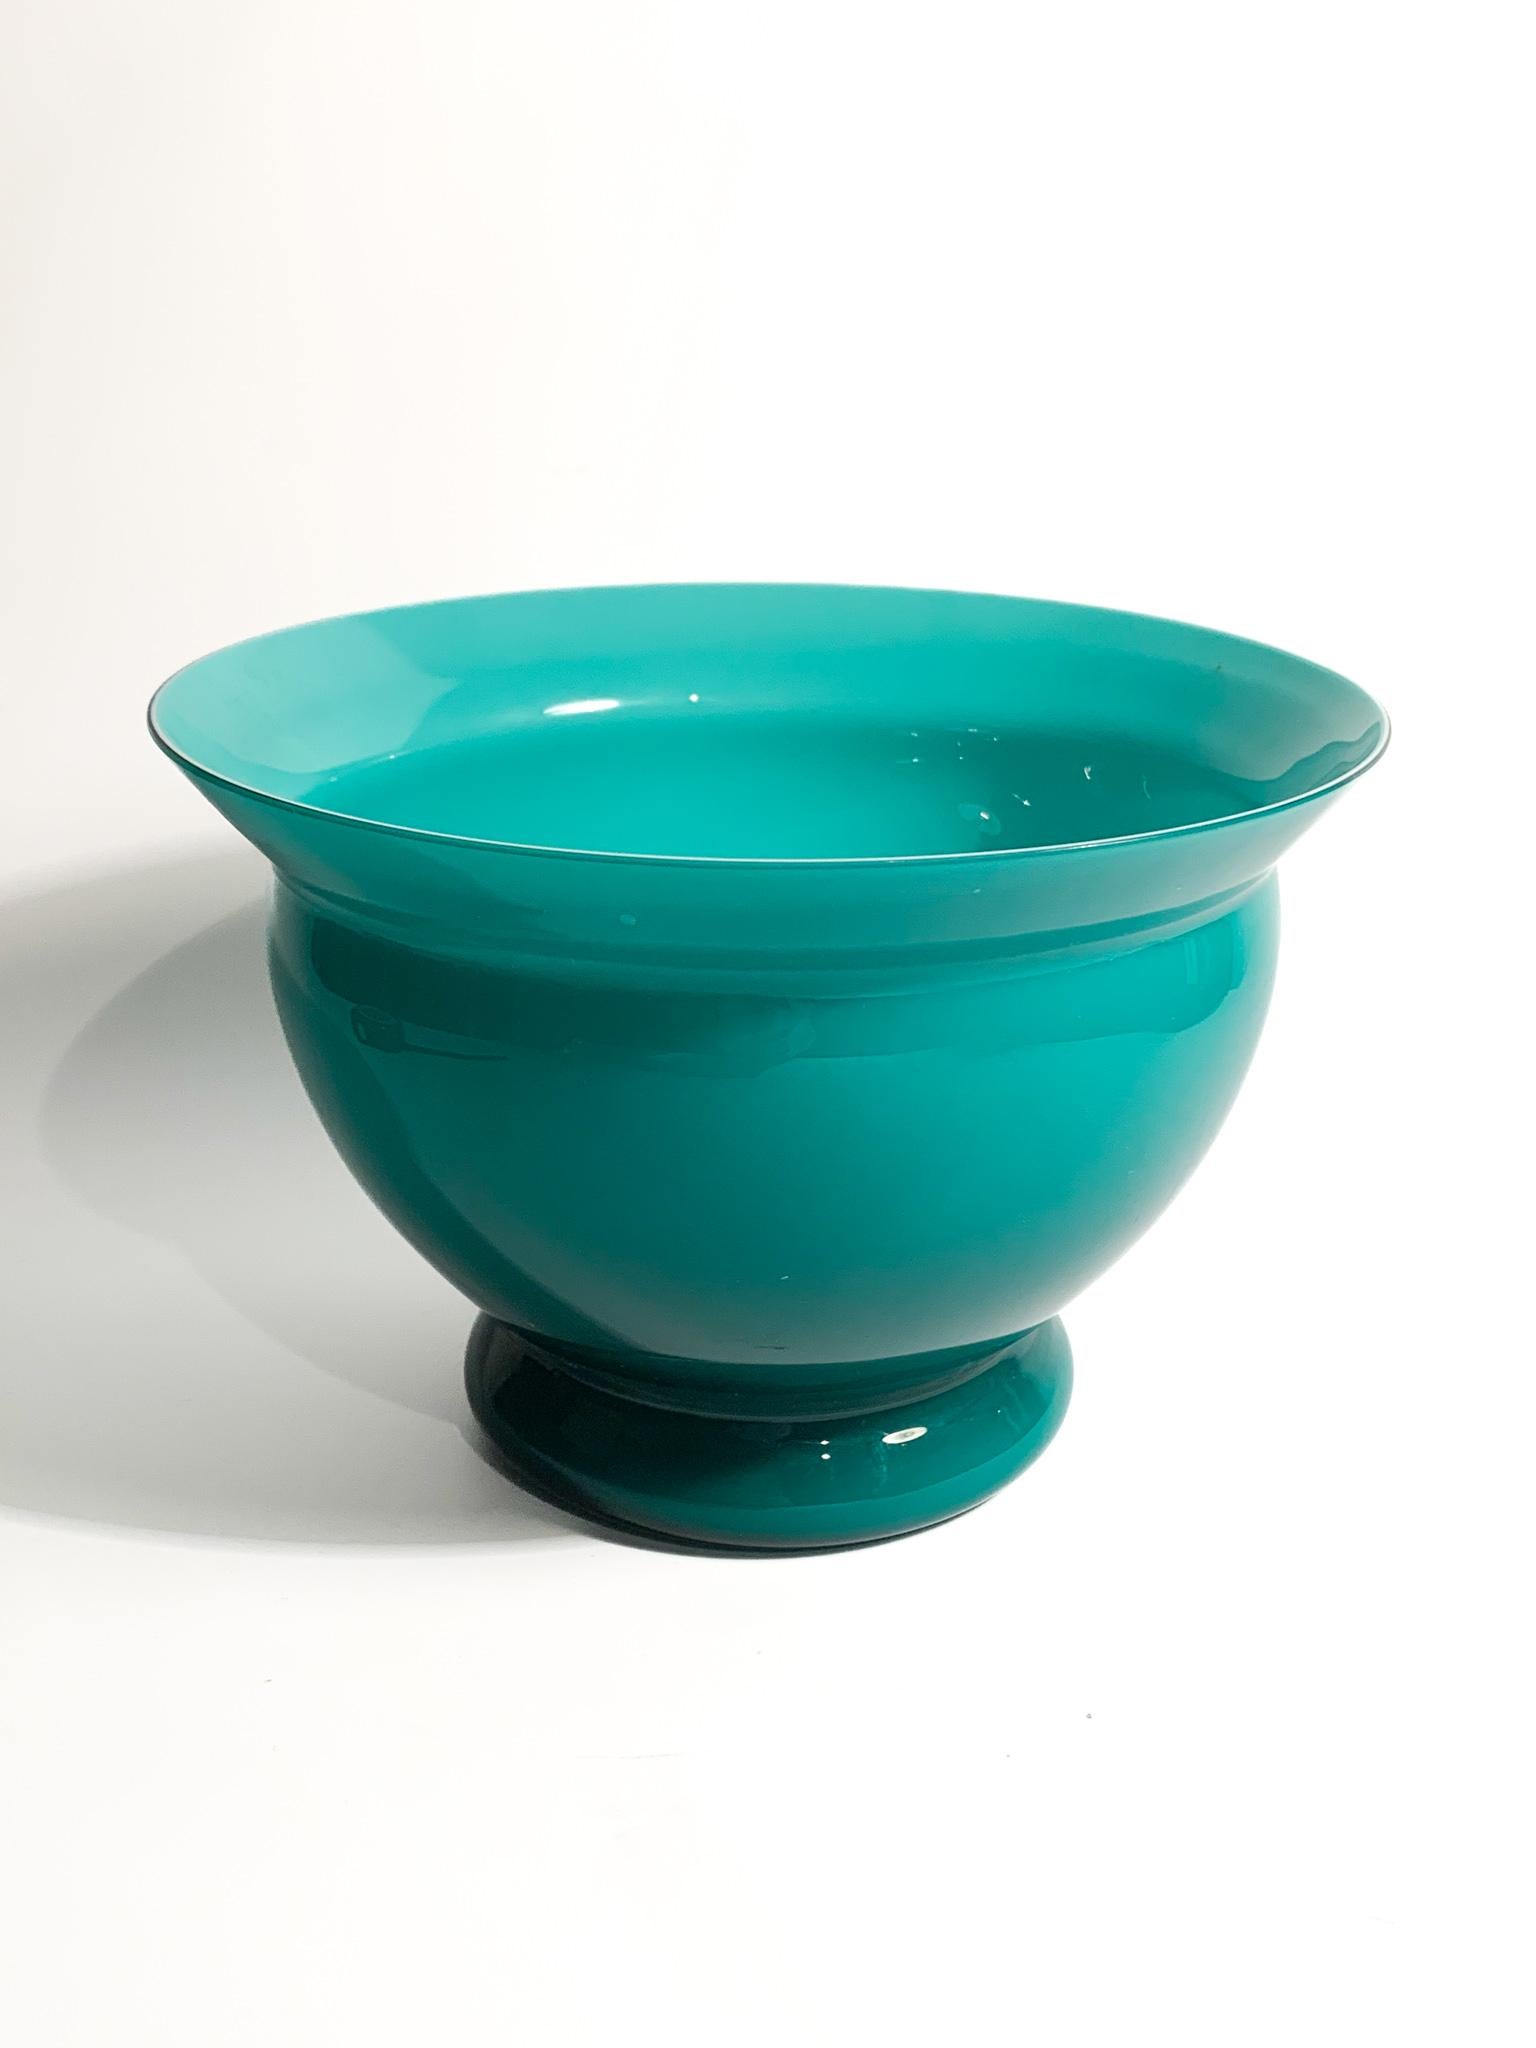 Murano Glass Vase by Alessandro Mendini for Venini from the 1980s For Sale 1